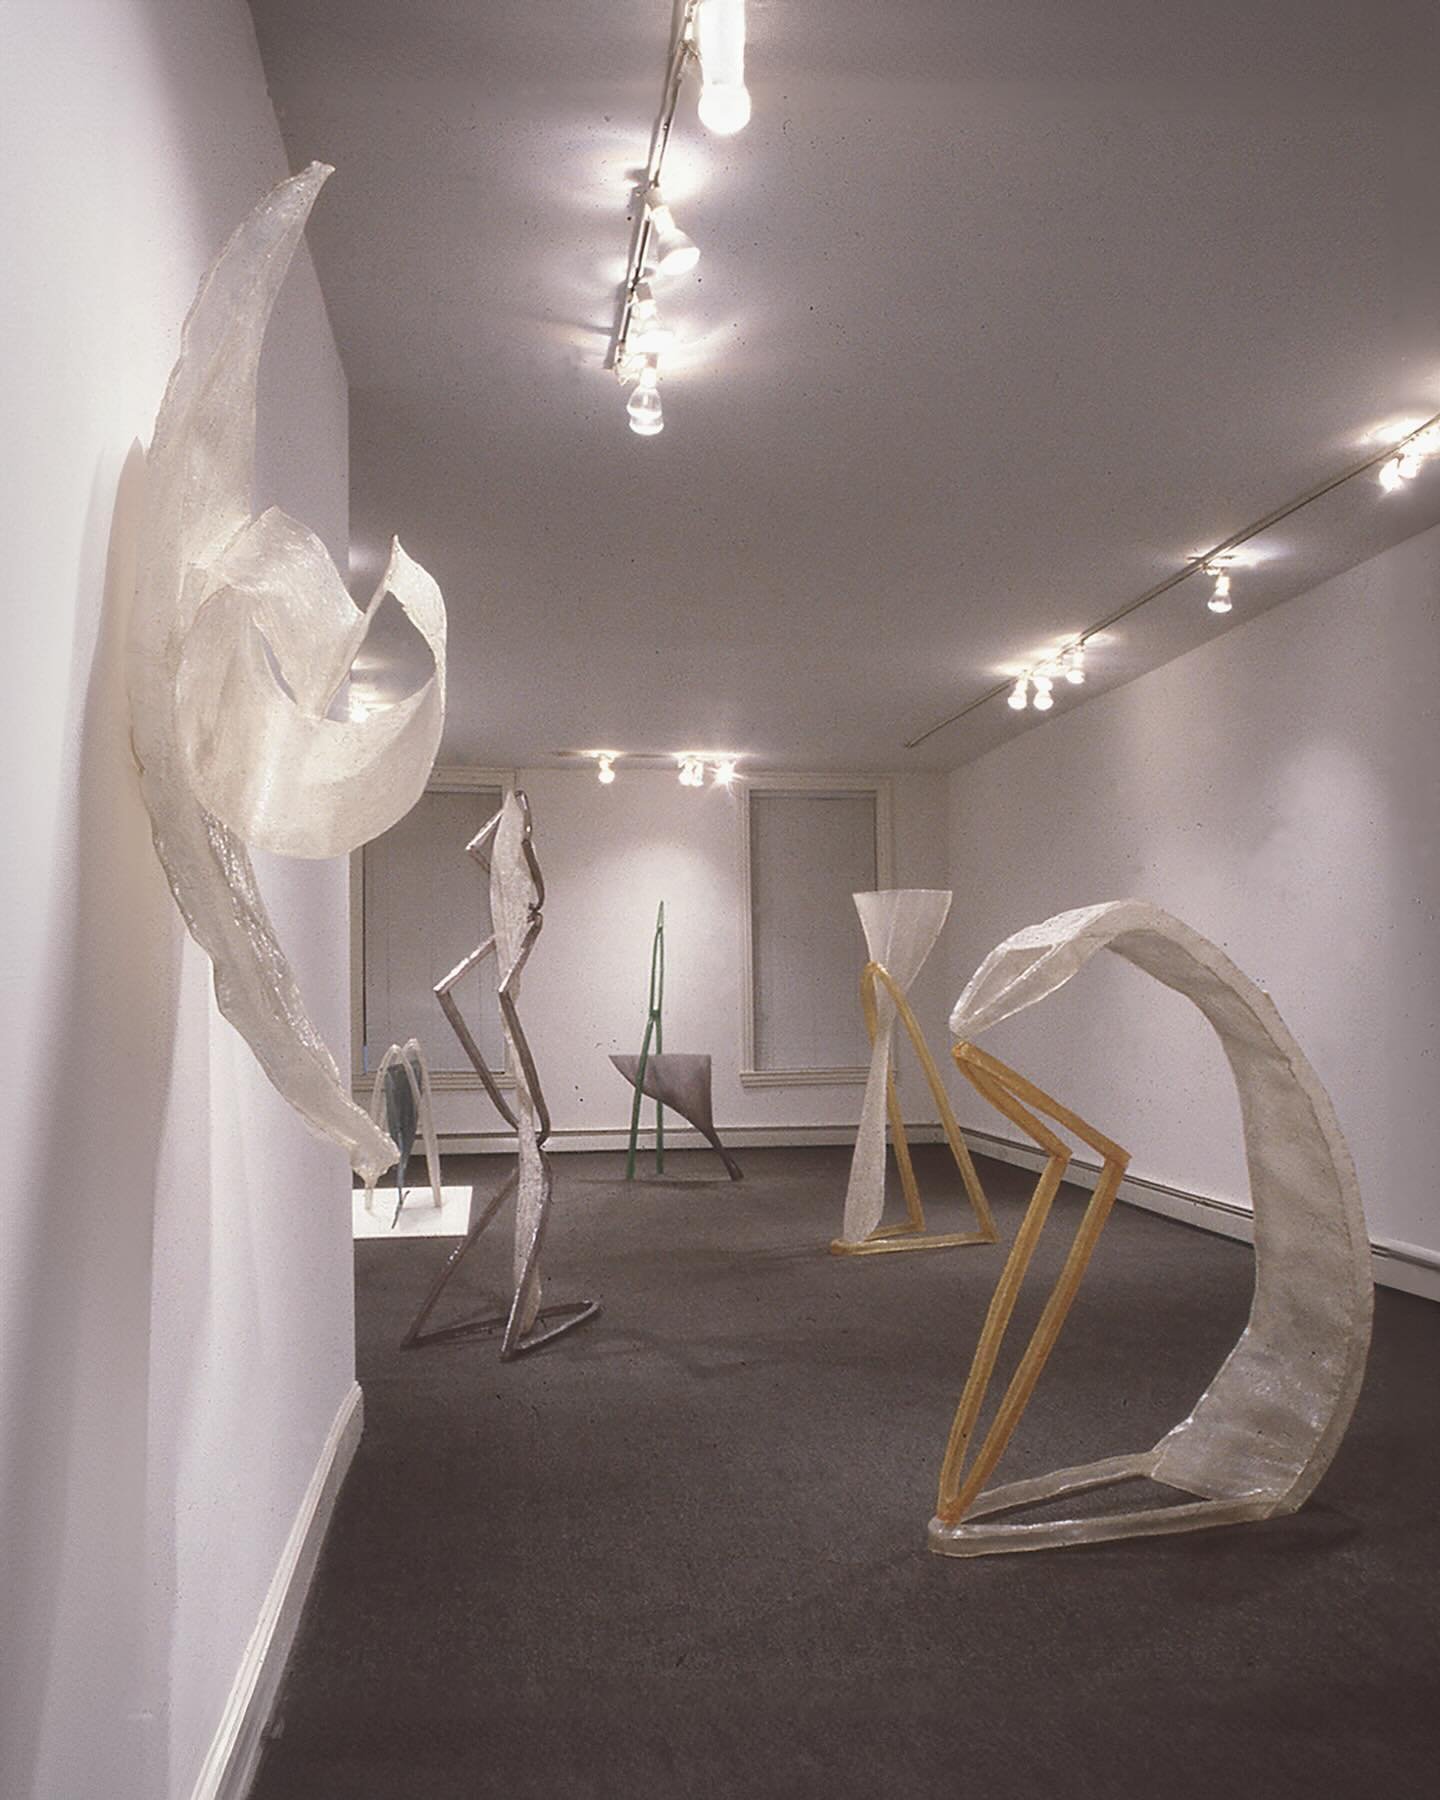 Solo show 1985 Lawrence Oliver Gallery, Philadelphia
#tombutter 
#artofthe&rsquo;80&rsquo;s 
Swipe for pics of 6 sculpture

Pac
4&rsquo;4&rdquo; h. x 1&rsquo; 7&rdquo; x 3&rsquo;10&rdquo;&rdquo;
fiberglass, dye

Spring 1985
6&rsquo; 10&rdquo;h. x 1&r